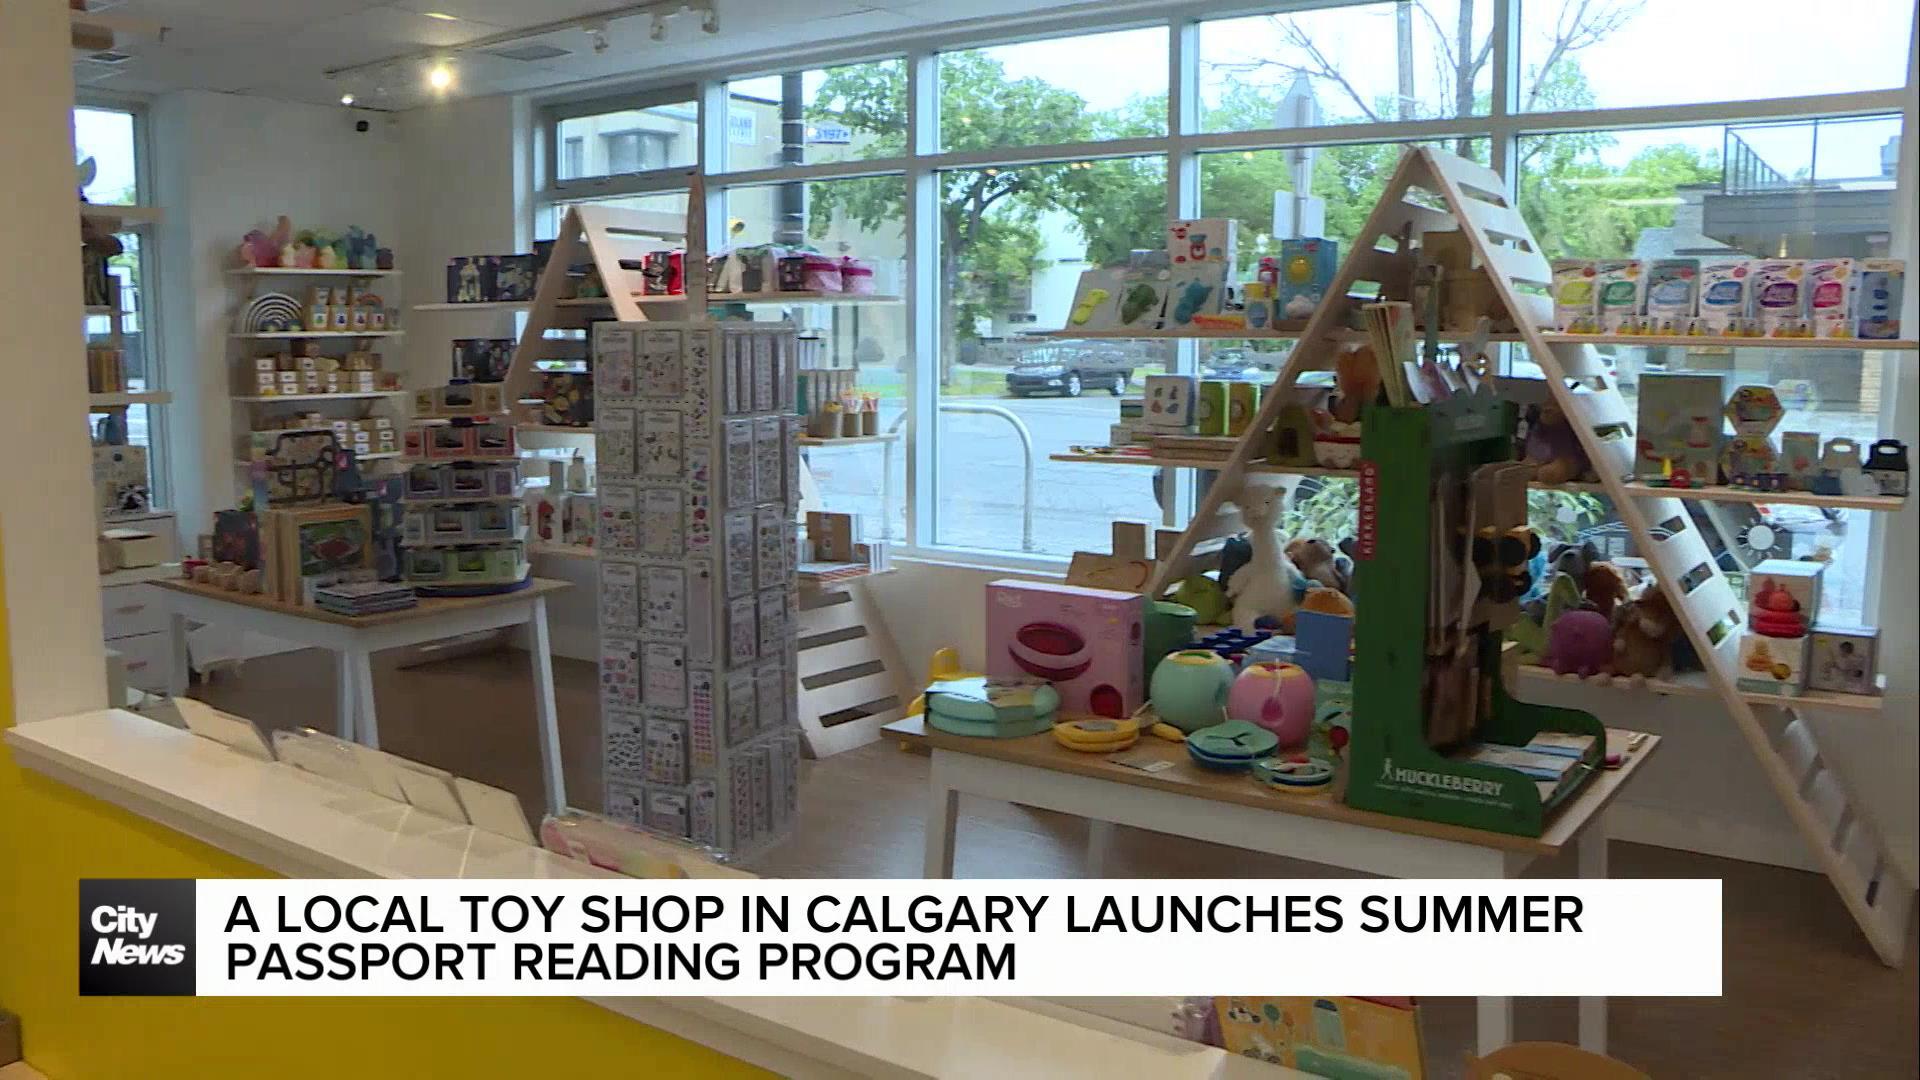 A local toy shop in Calgary launches summer passport reading program